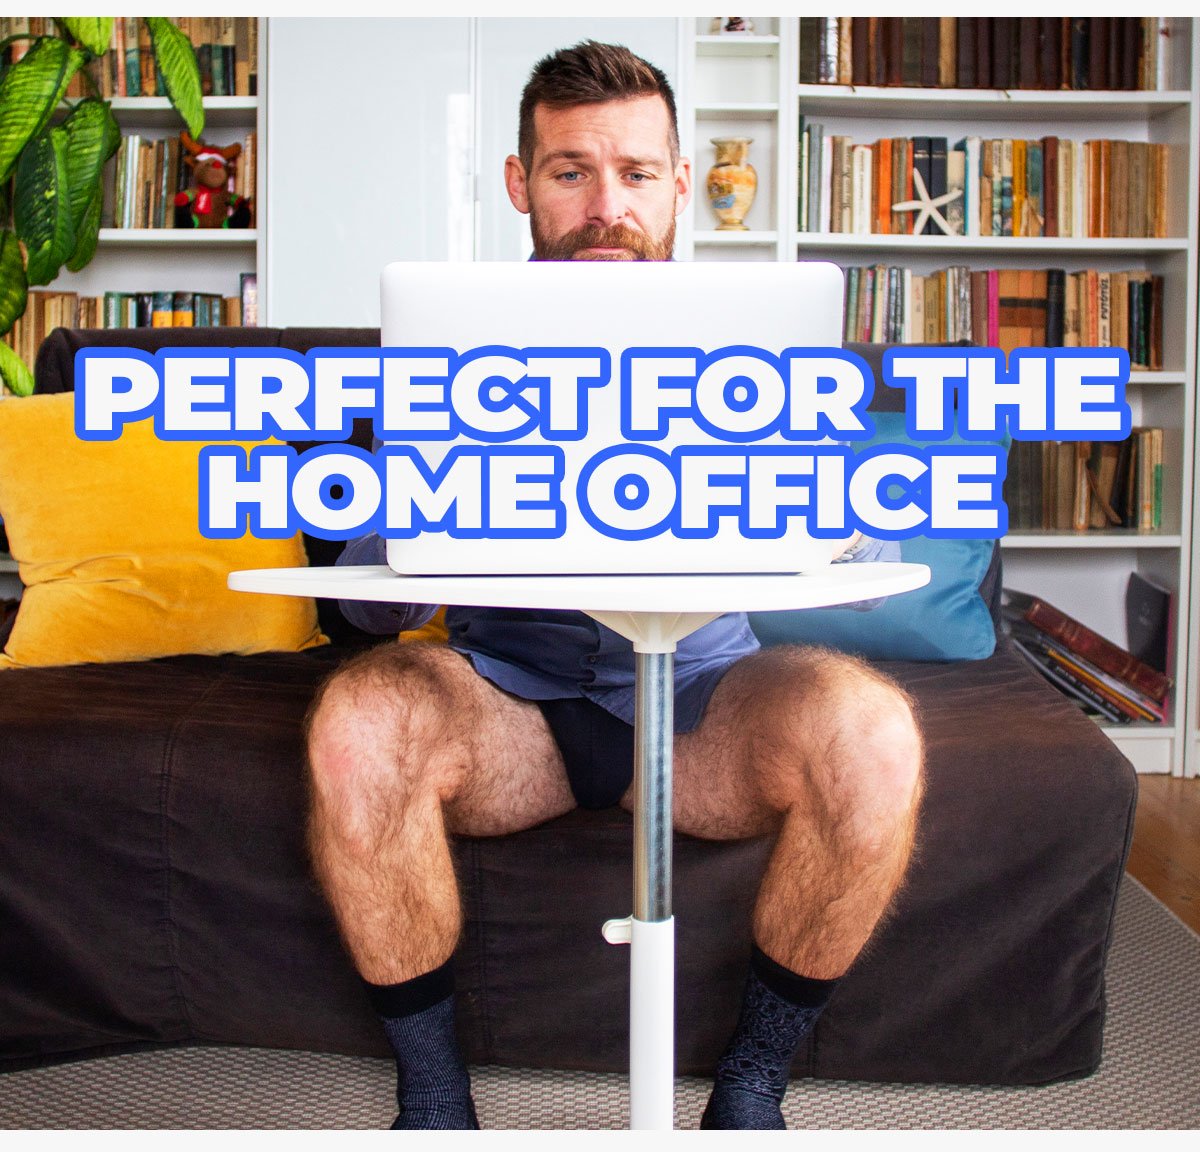 Man in shirt, underwear, and socks with no pants taking a work meeting from his laptop. Perfect for the home office.